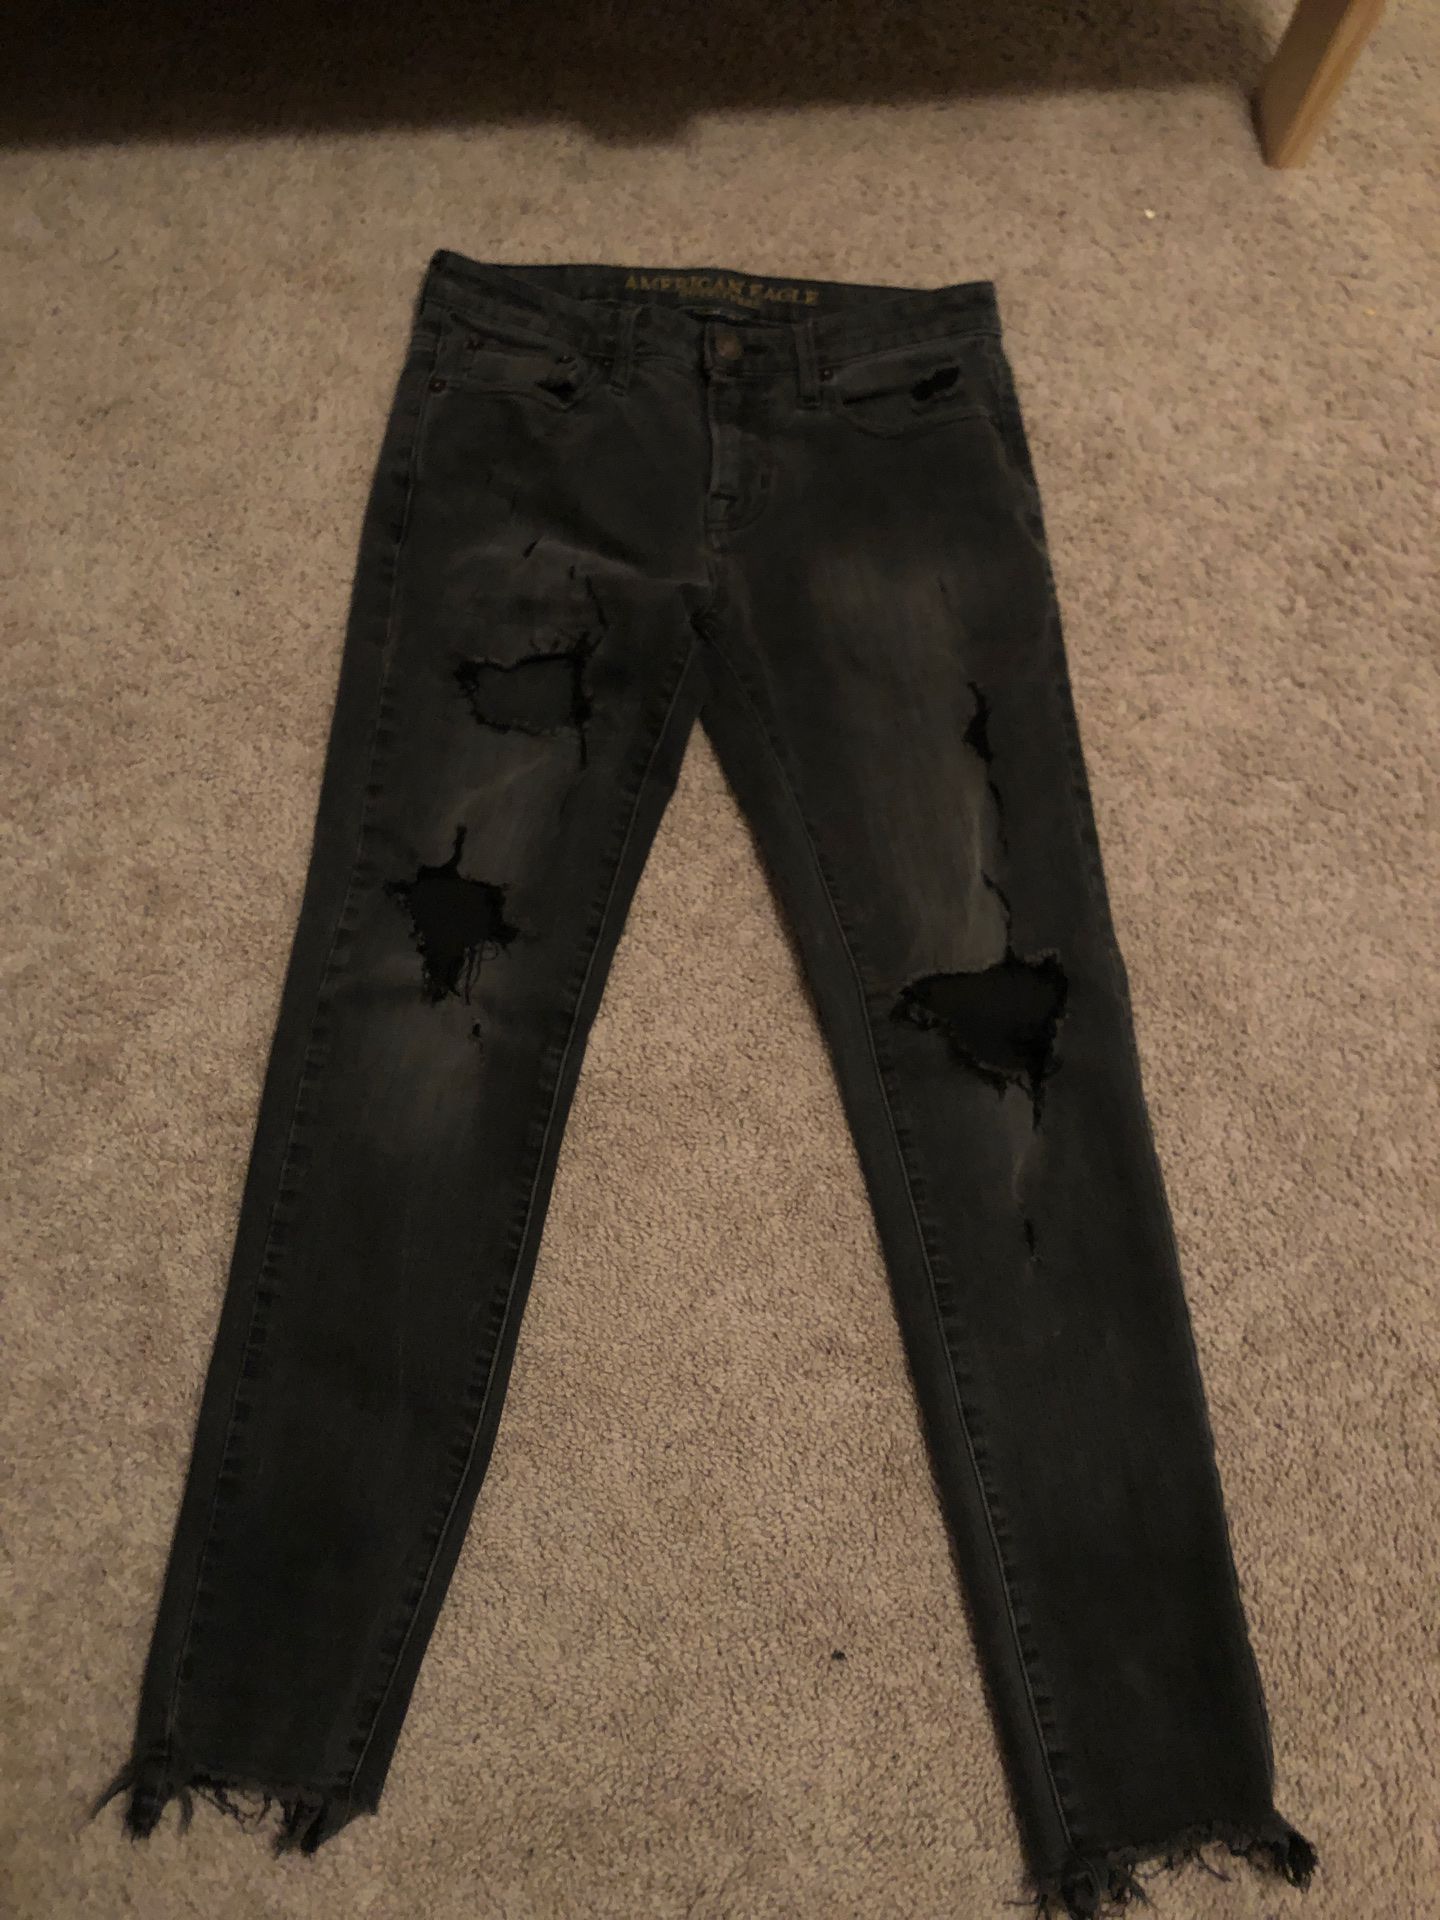 American eagle Ripped jeans 30/30